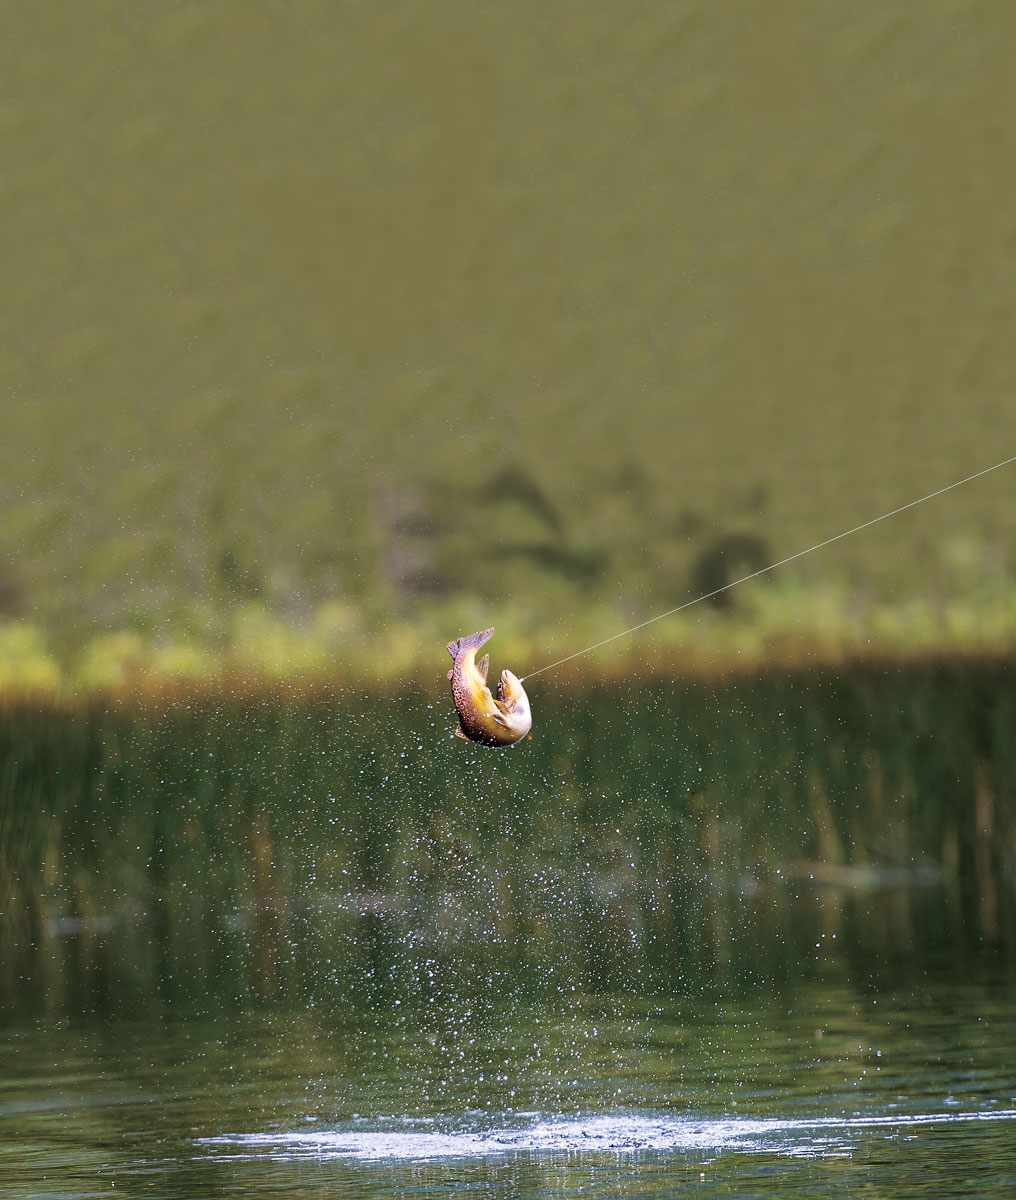 A trout caught on the end of a fishing line.